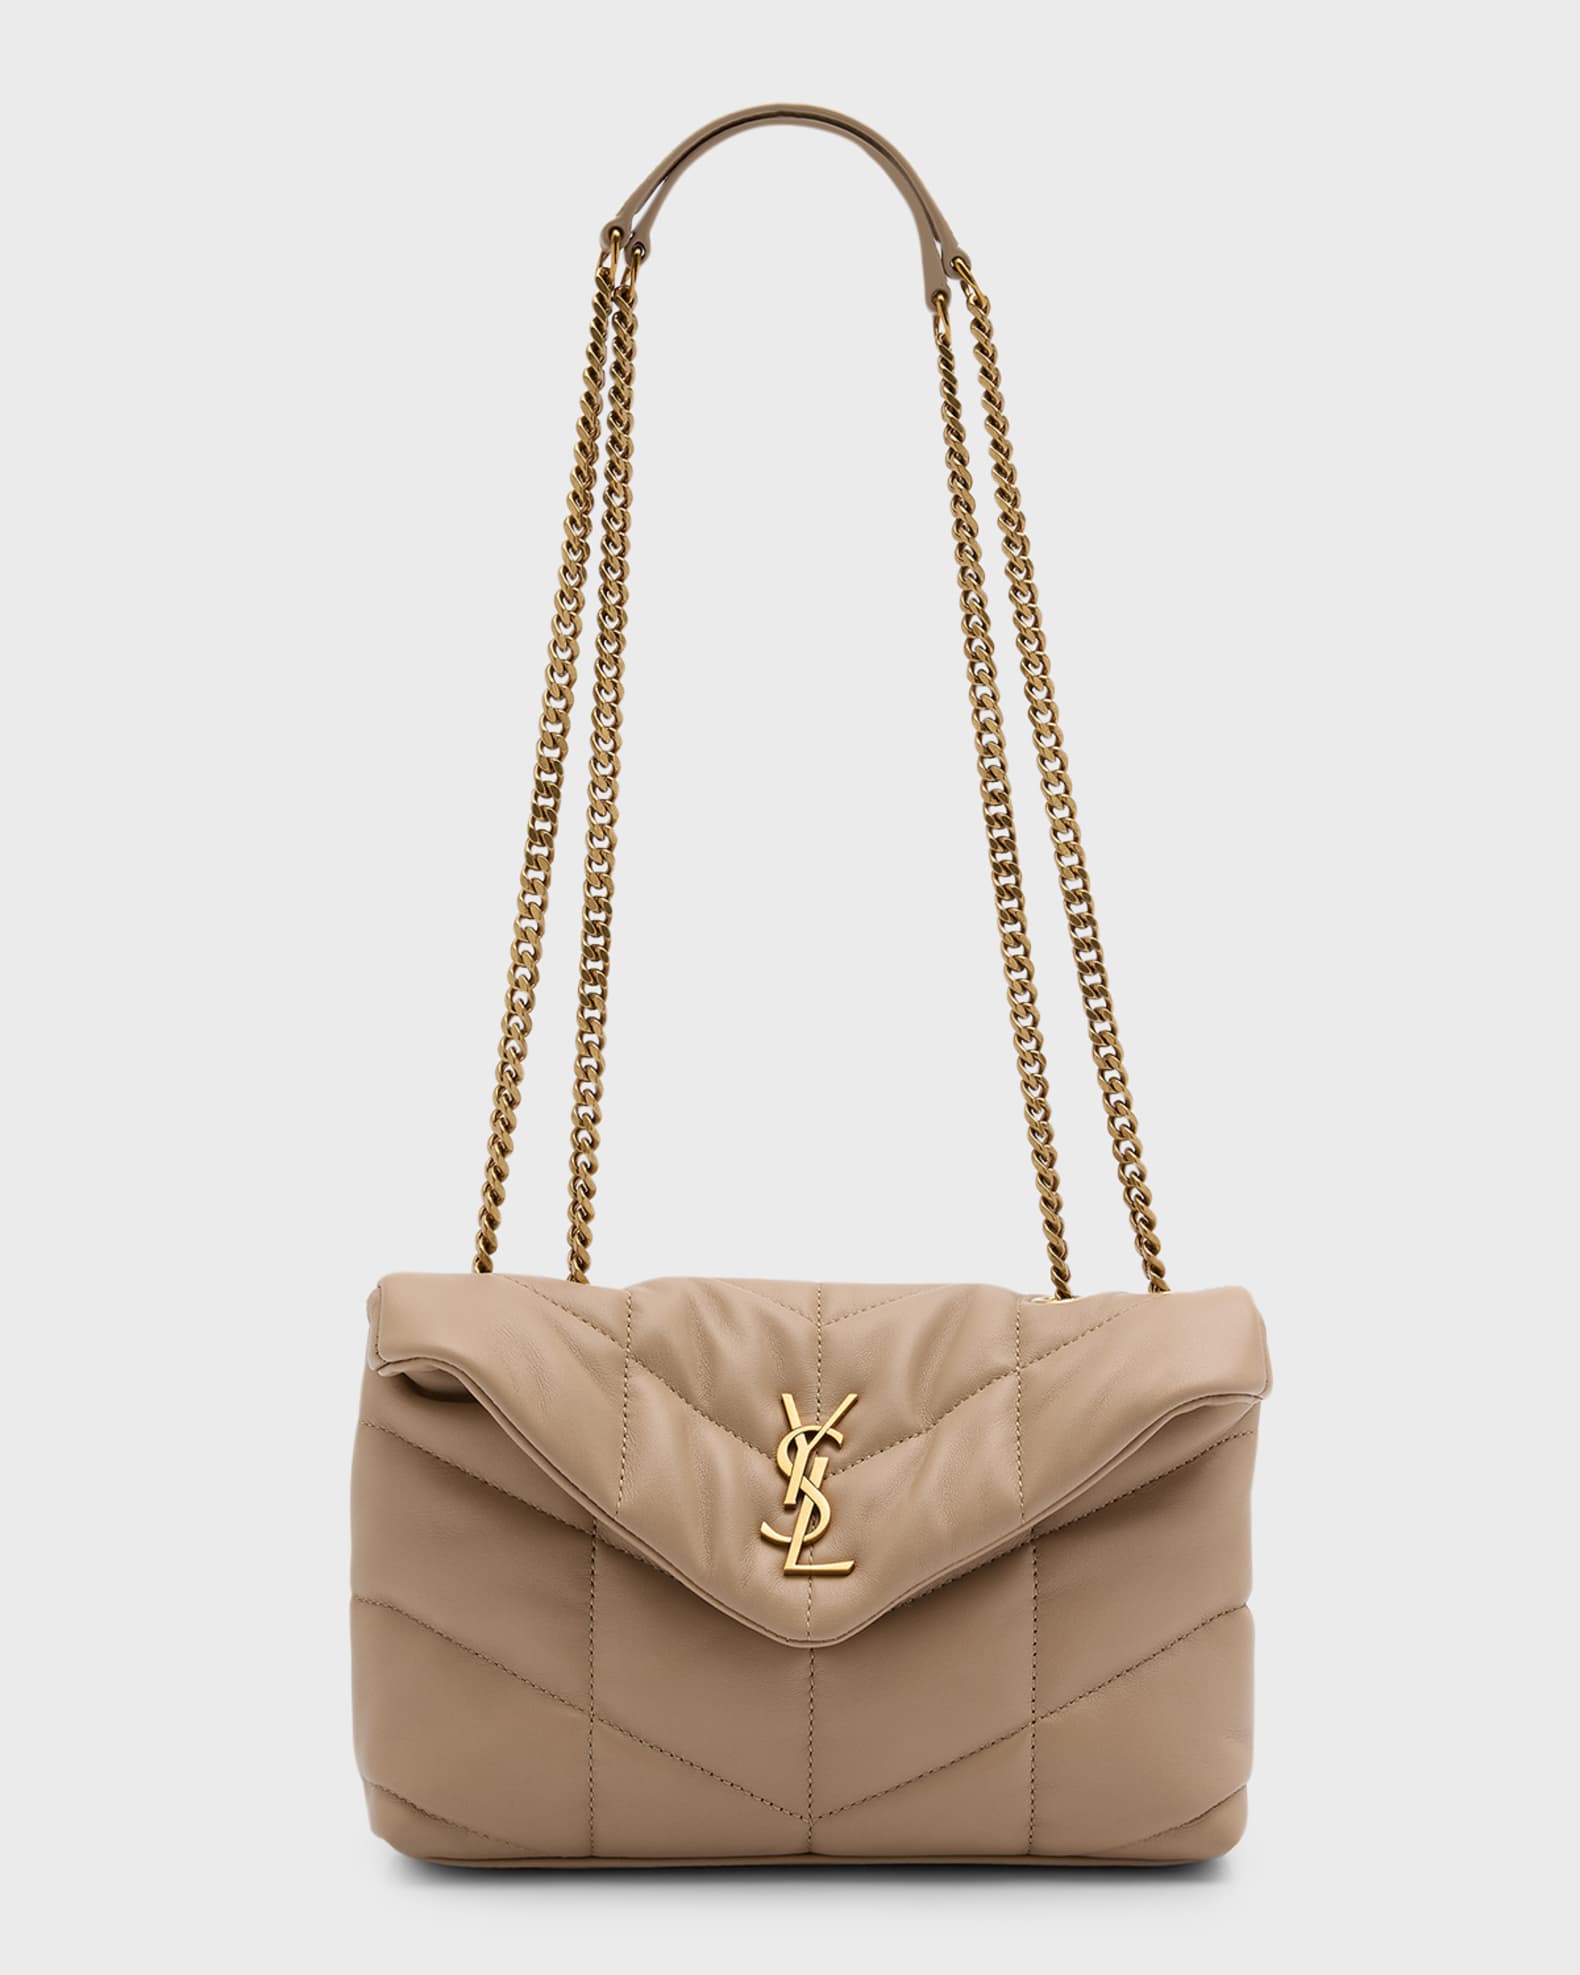 Lou Puffer Toy YSL Shoulder Bag in Quilted Leather | Neiman Marcus